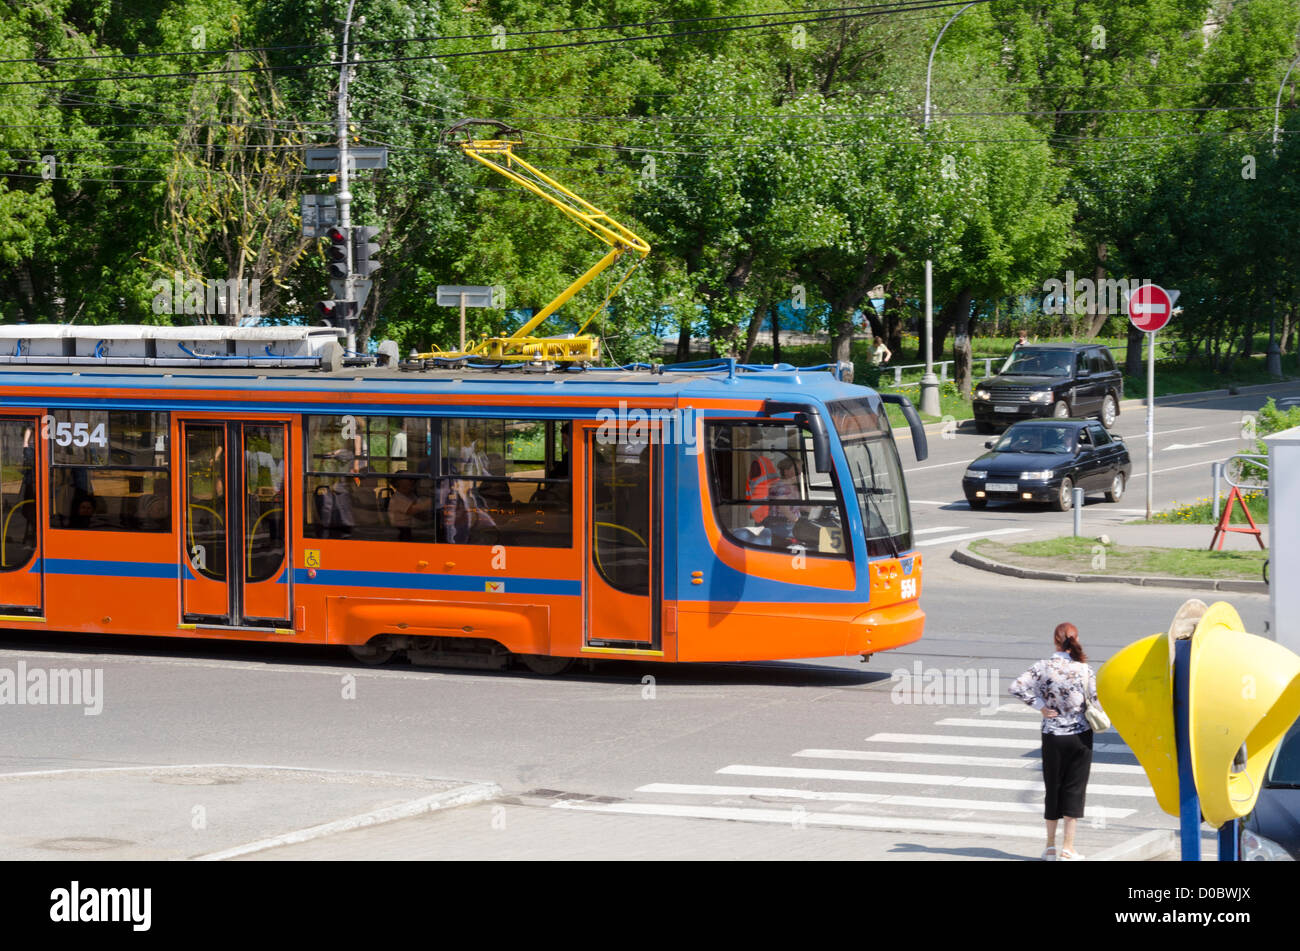 Tram crossing an intersection, Perm, Russia Stock Photo